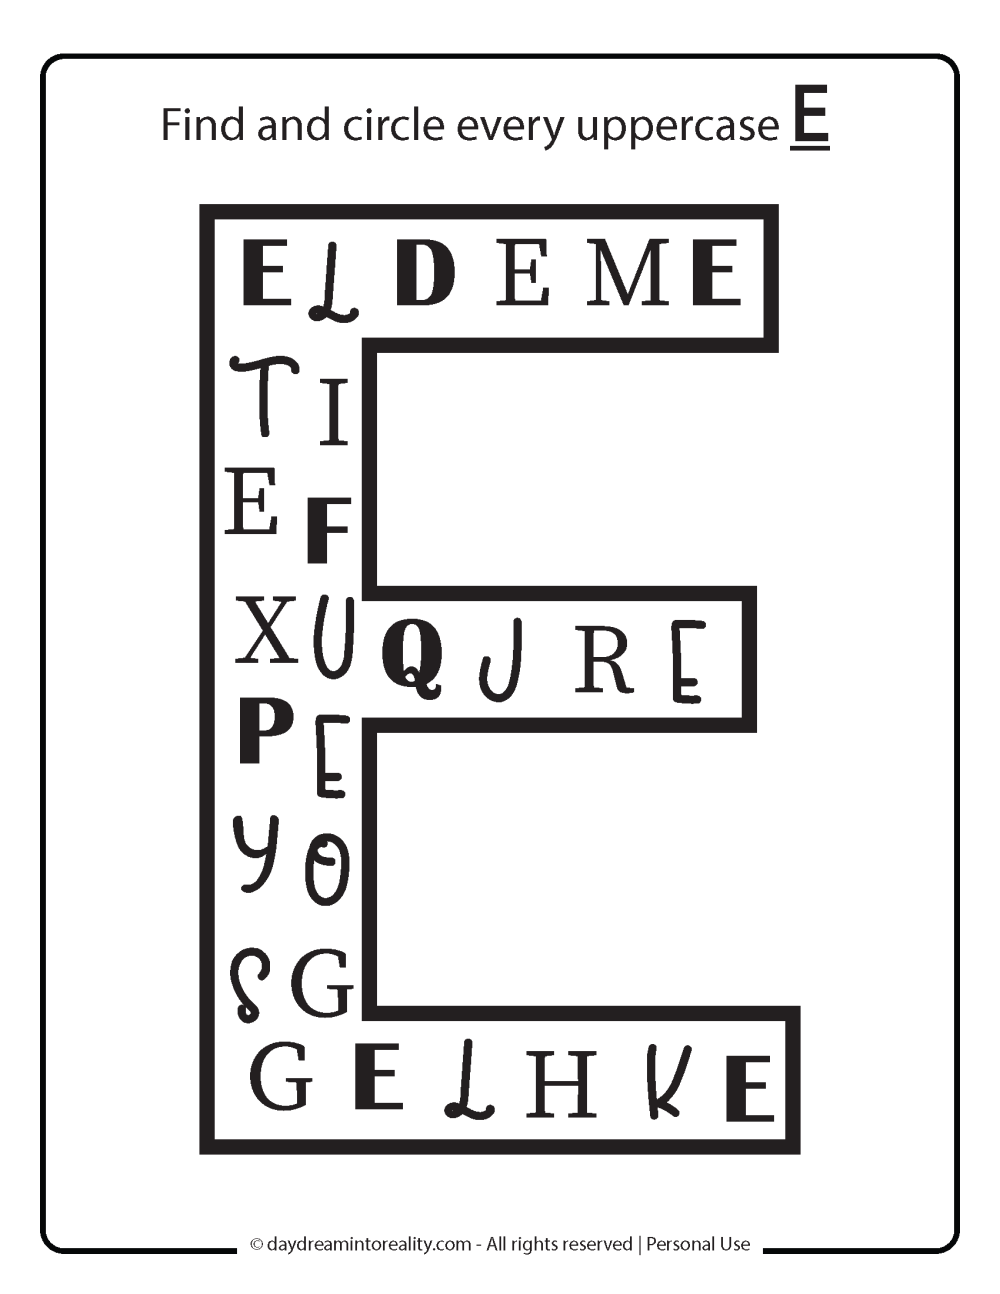 Letter E worksheet free printables - find and circle all uppercase E.